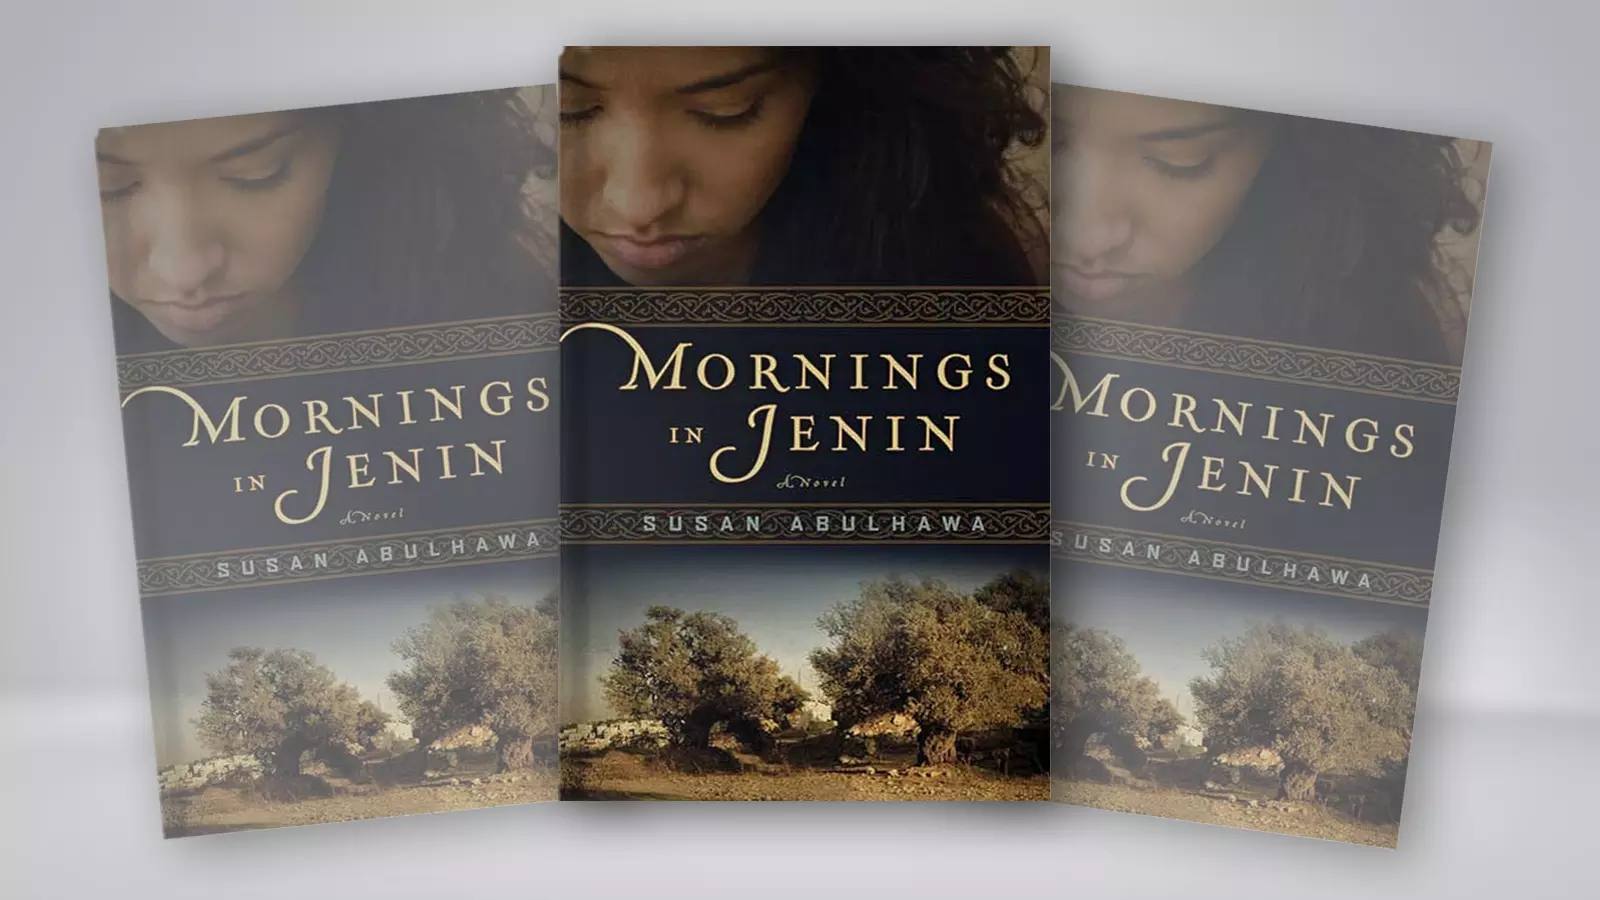 Susan Abulhawas Mornings in Jenin, originally published in the US in 2006 as The Scar of David — is the first mainstream novel in English to explore life in post-1948 Palestine.